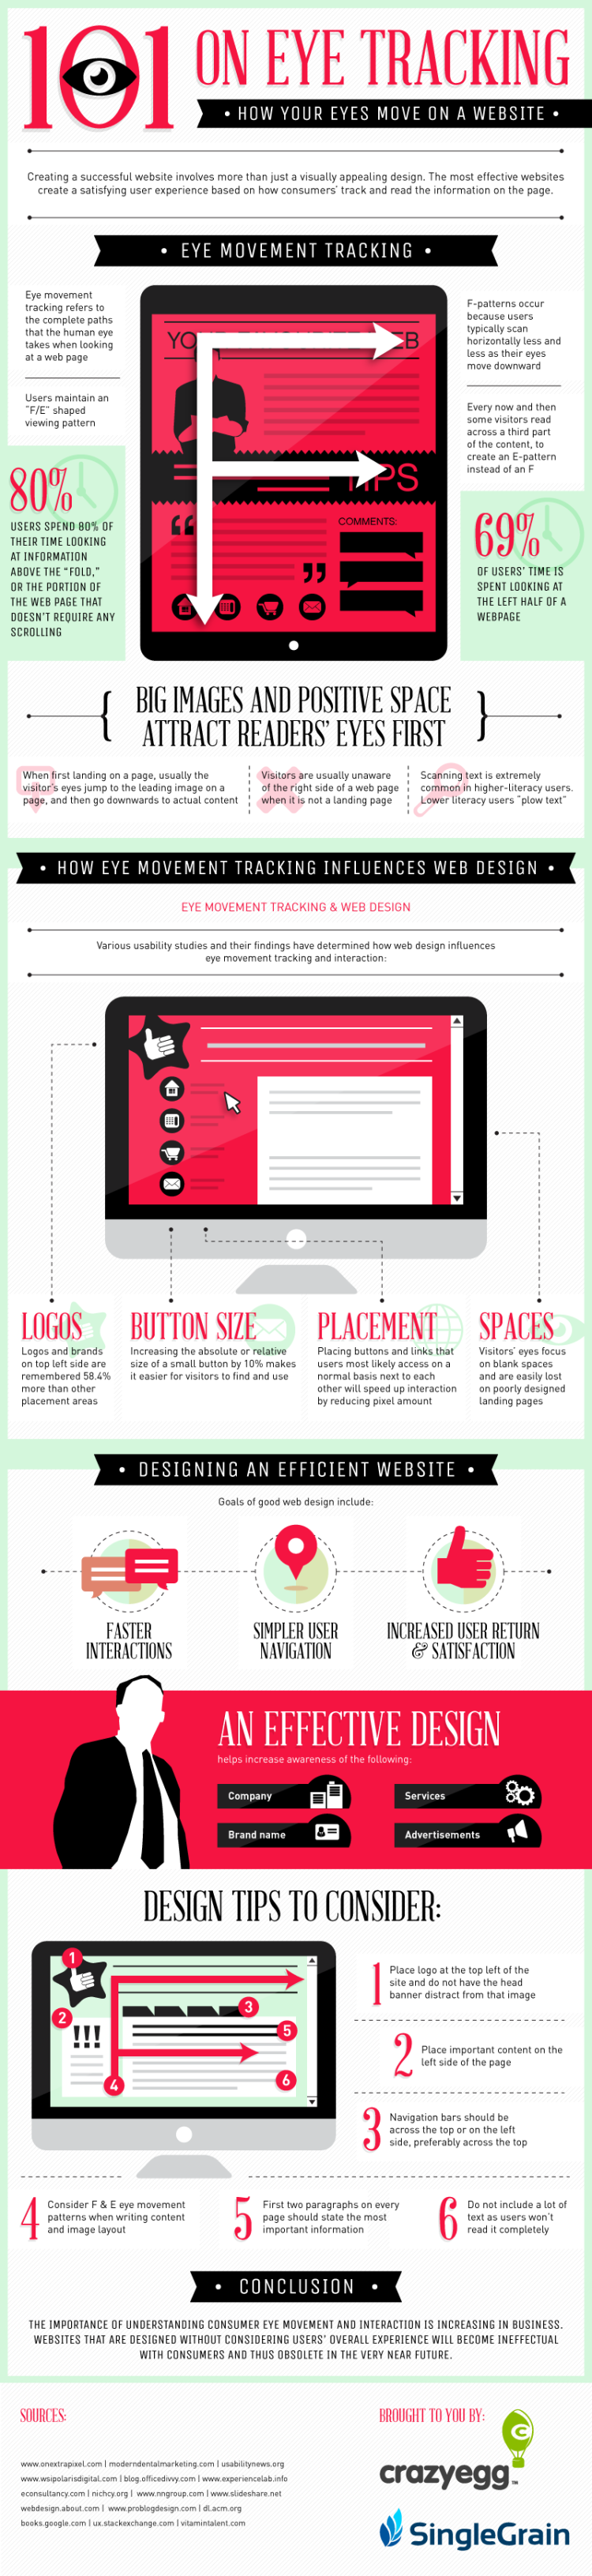 Website Eye Tracking 101 Infographic